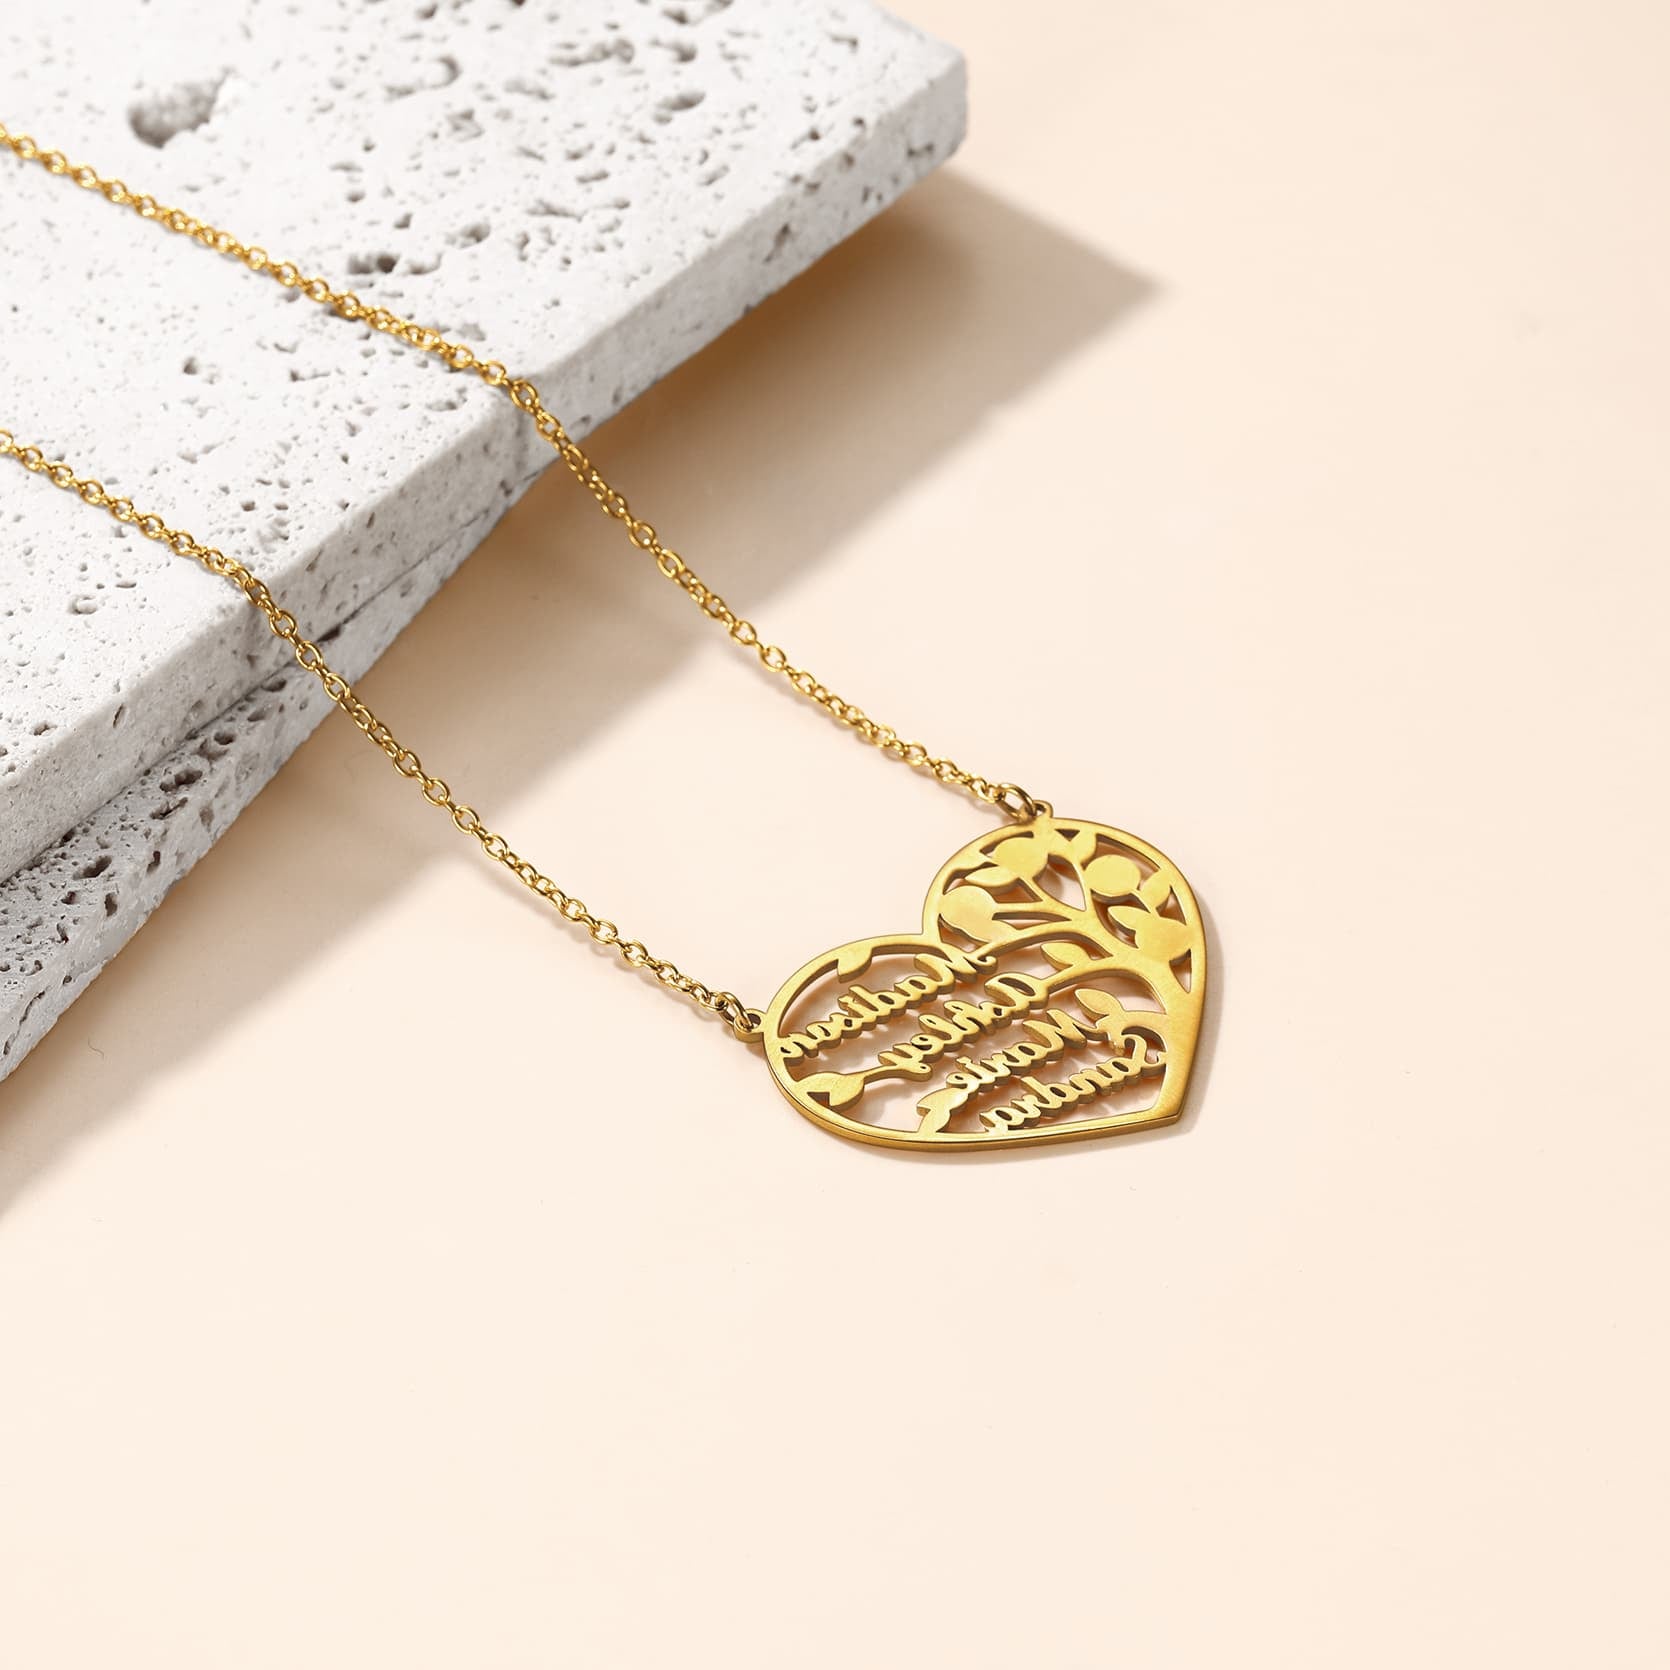 Birthstonesjewelry Heart Tree Of Life Necklace Gold